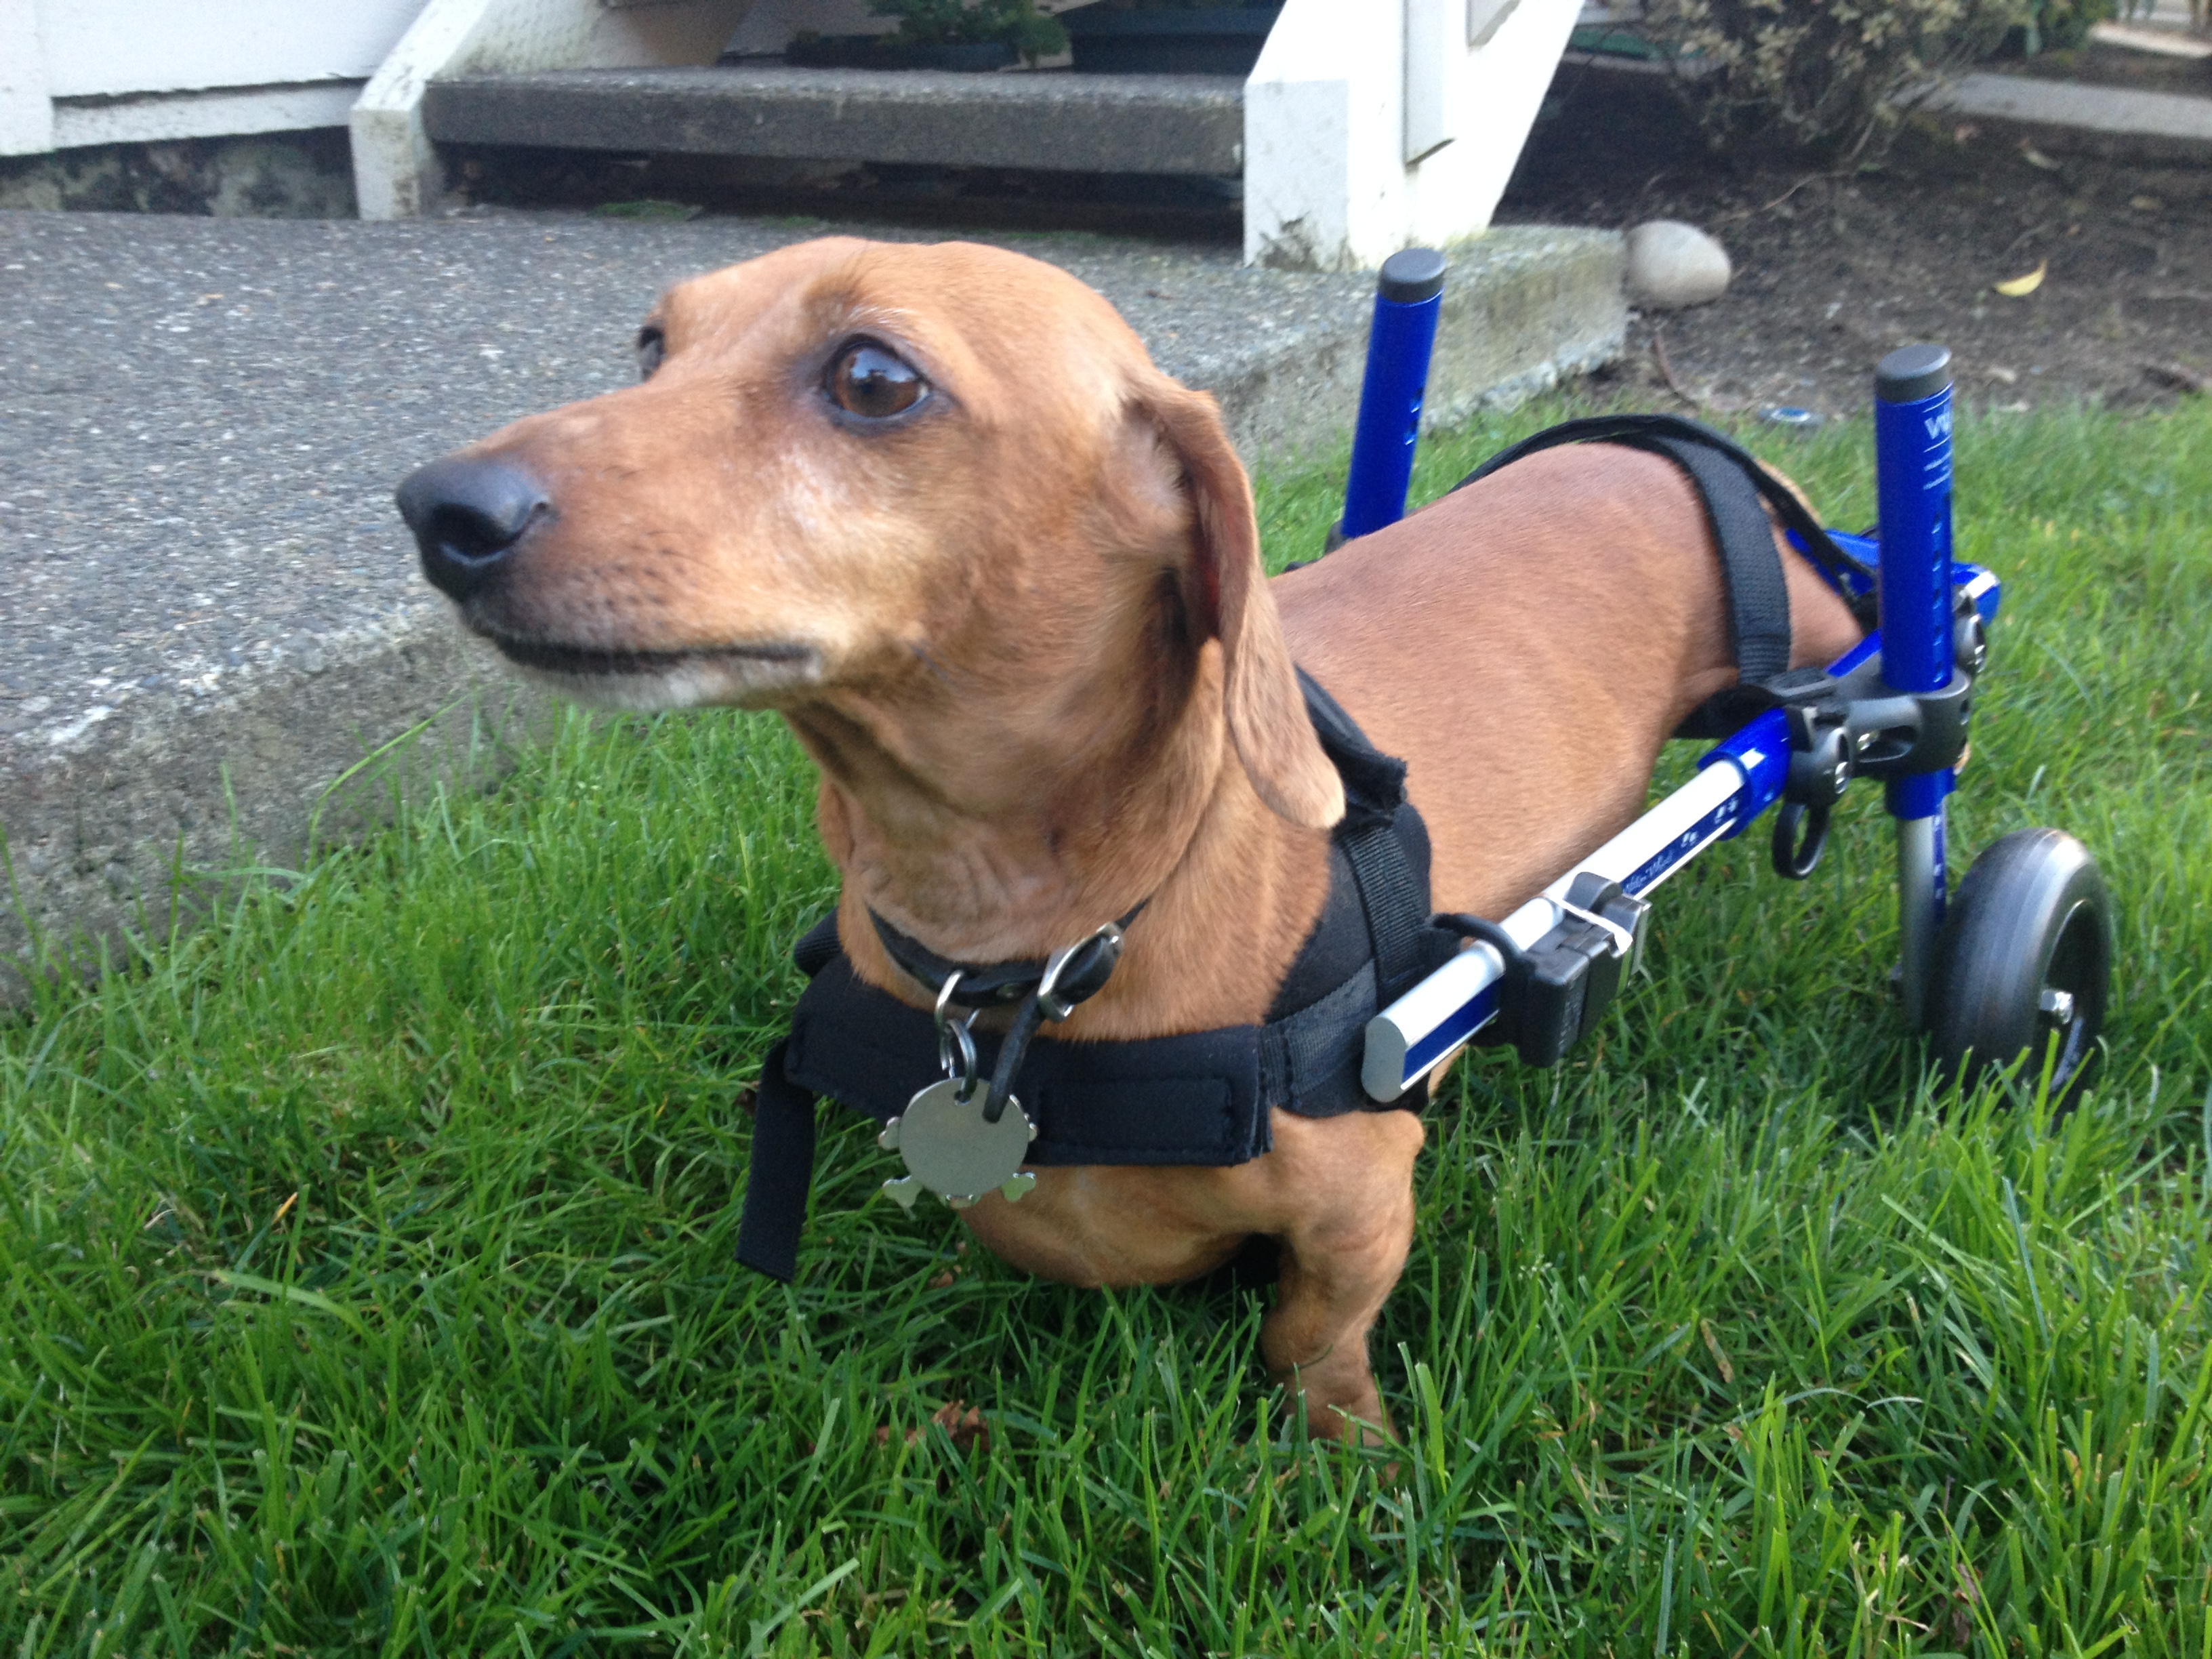 Put the paralyzed dachshund in a new dog wheelchair